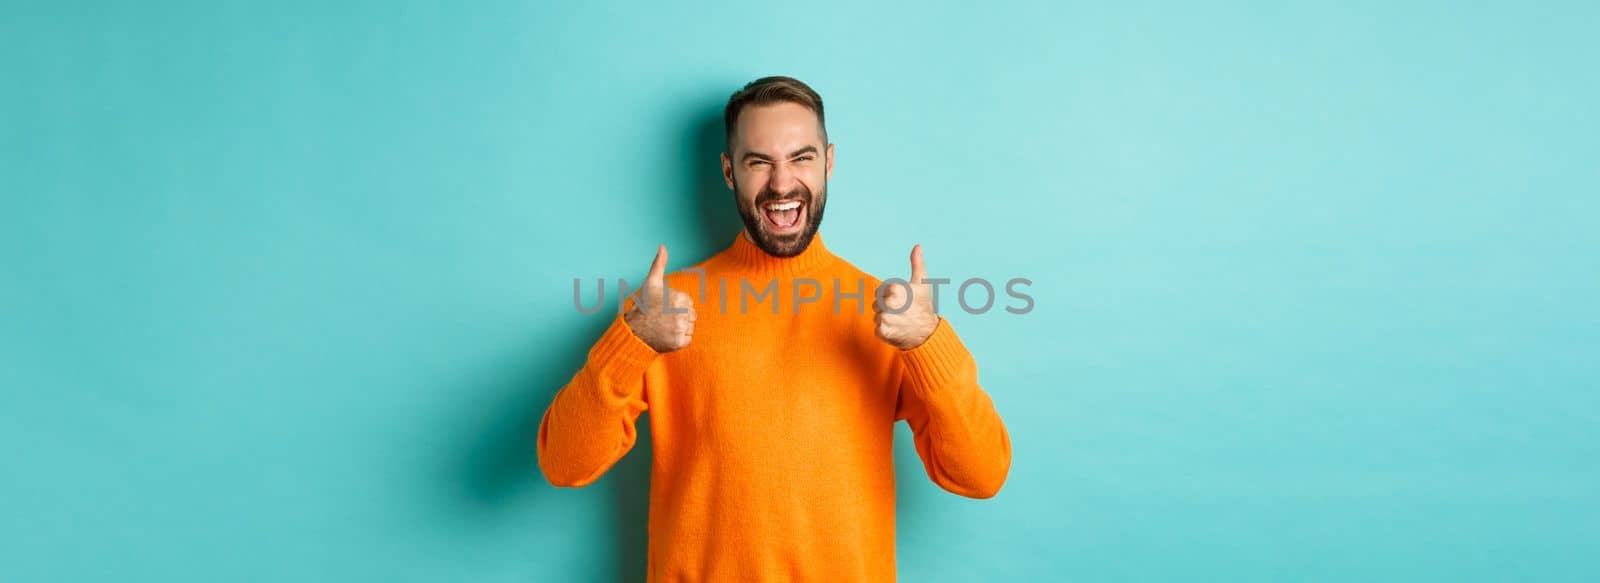 Super good. Satisfied happy man showing thumbs up, agree with you, praise excellent work, looking pleased, standing in orange sweater against light blue background by Benzoix